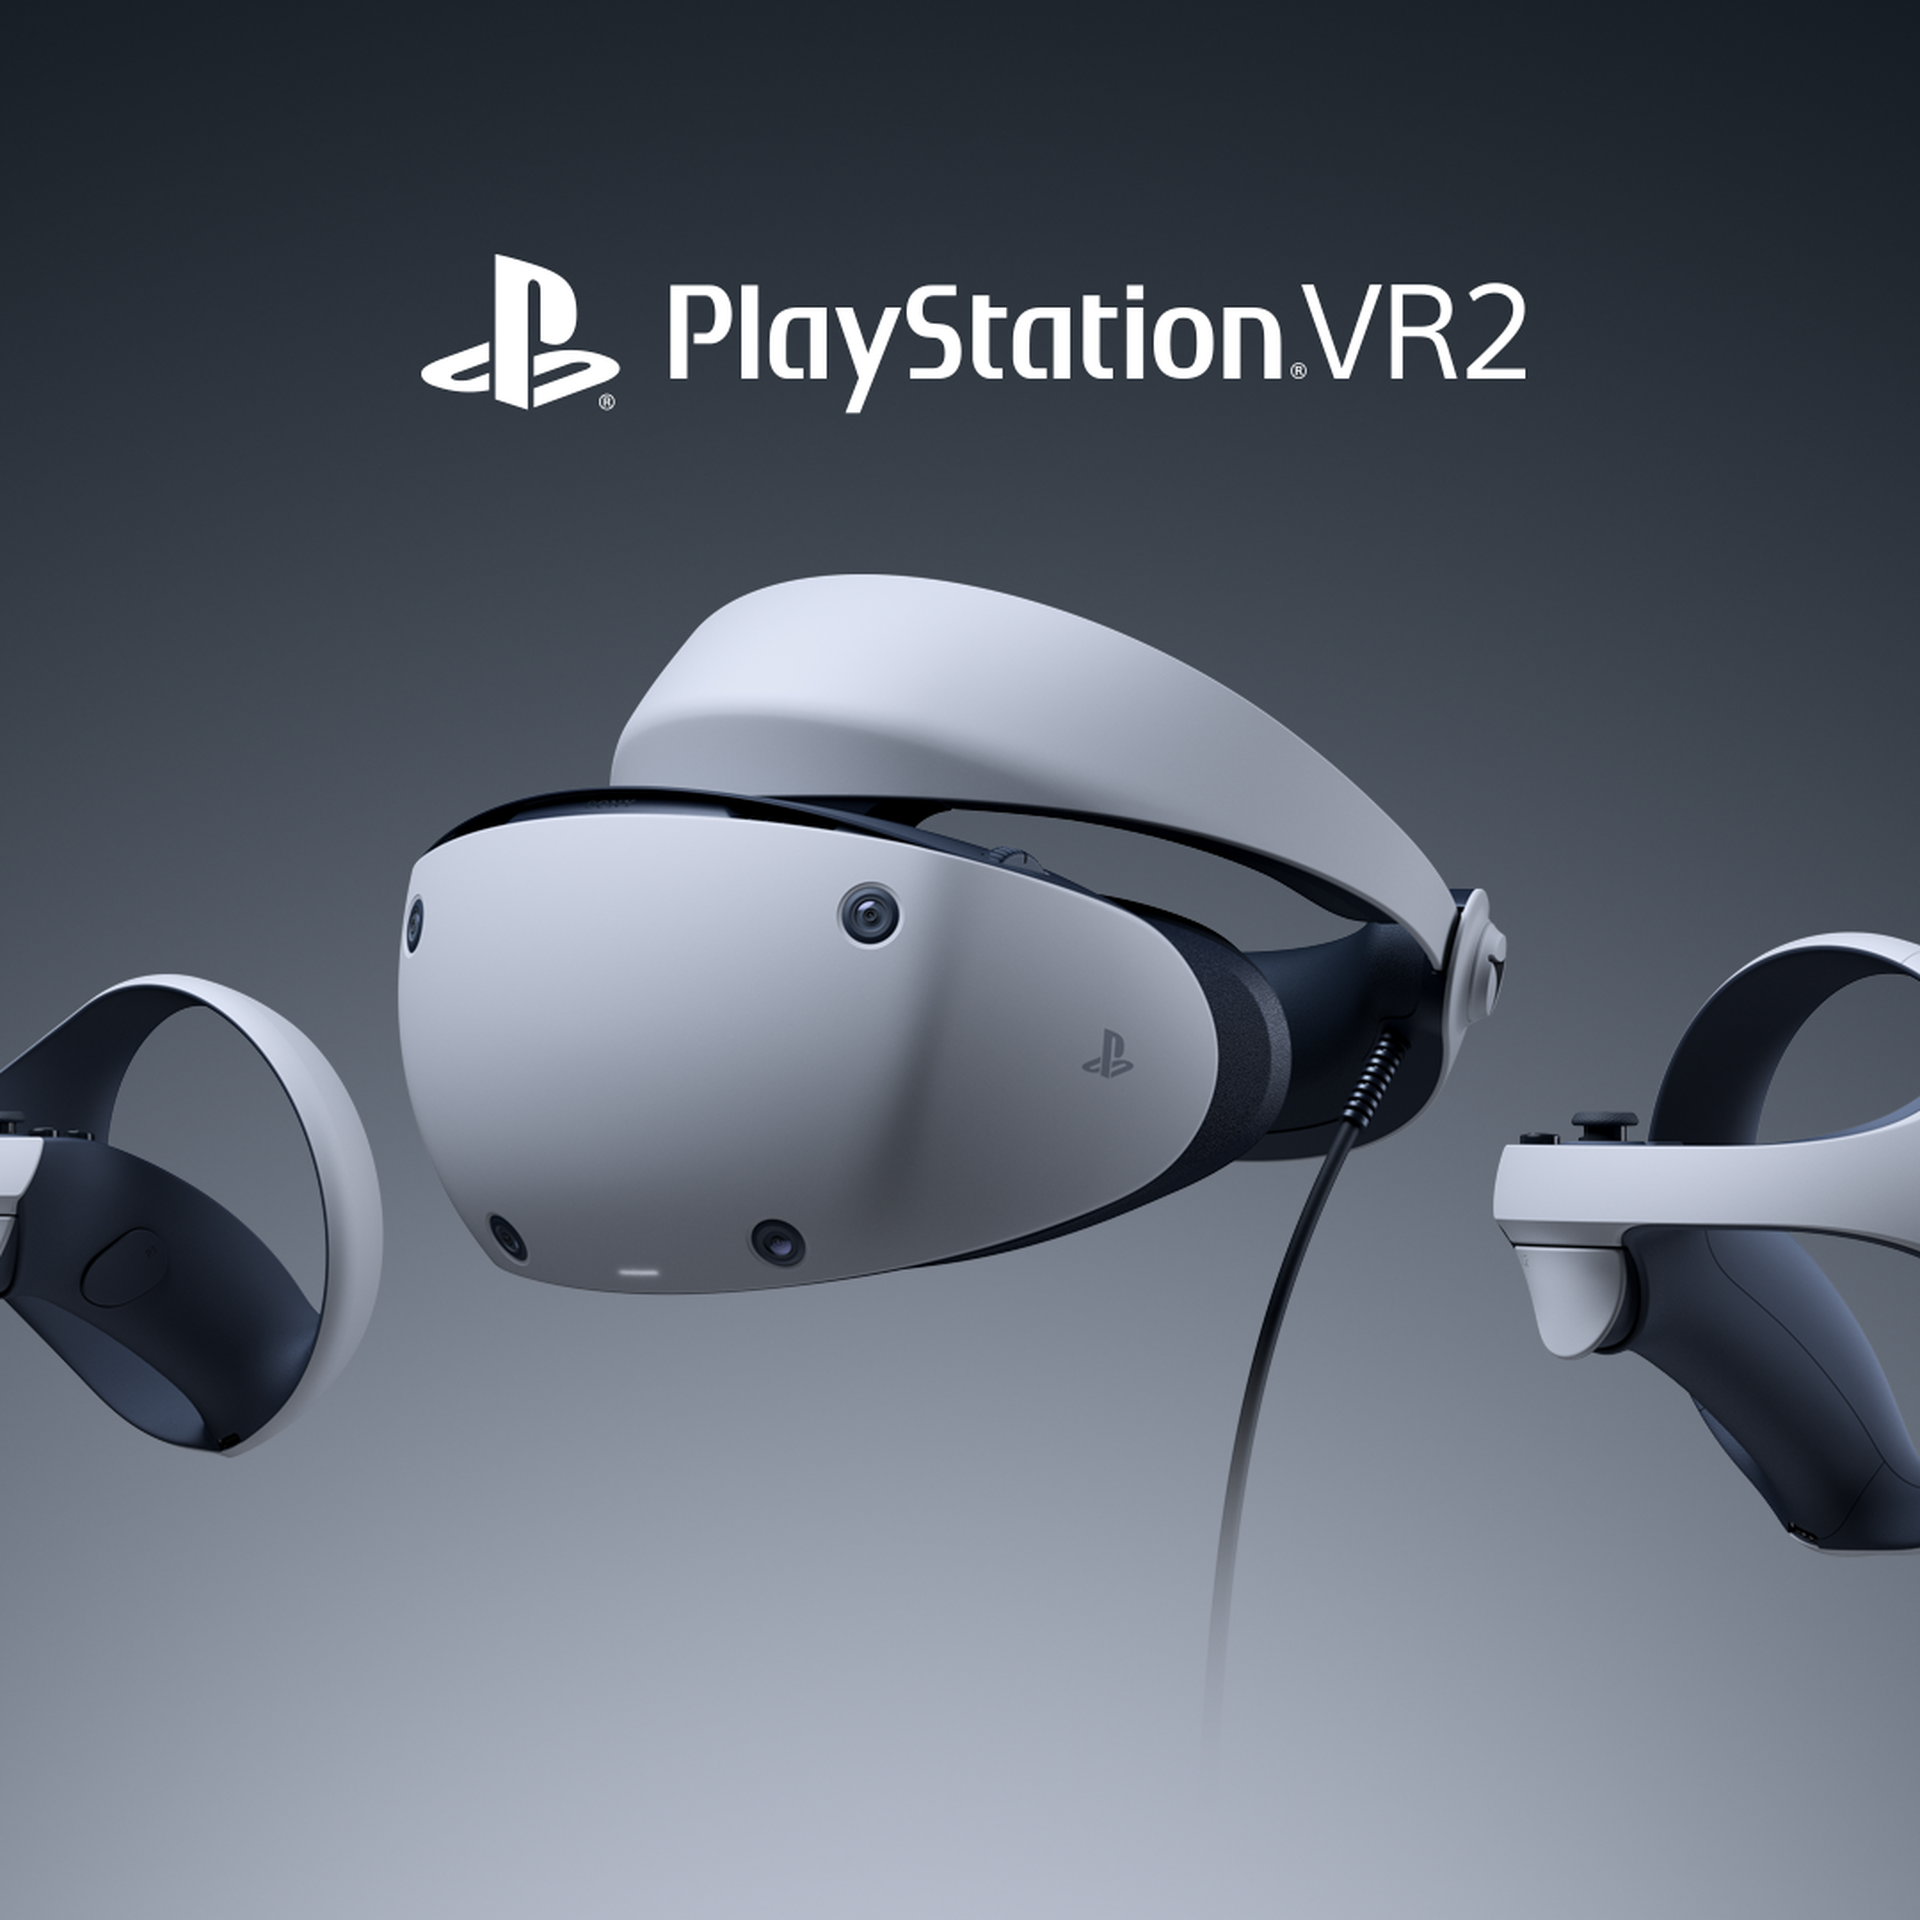 Photo of the PSVR2 headset and its two controllers in front of a gray background